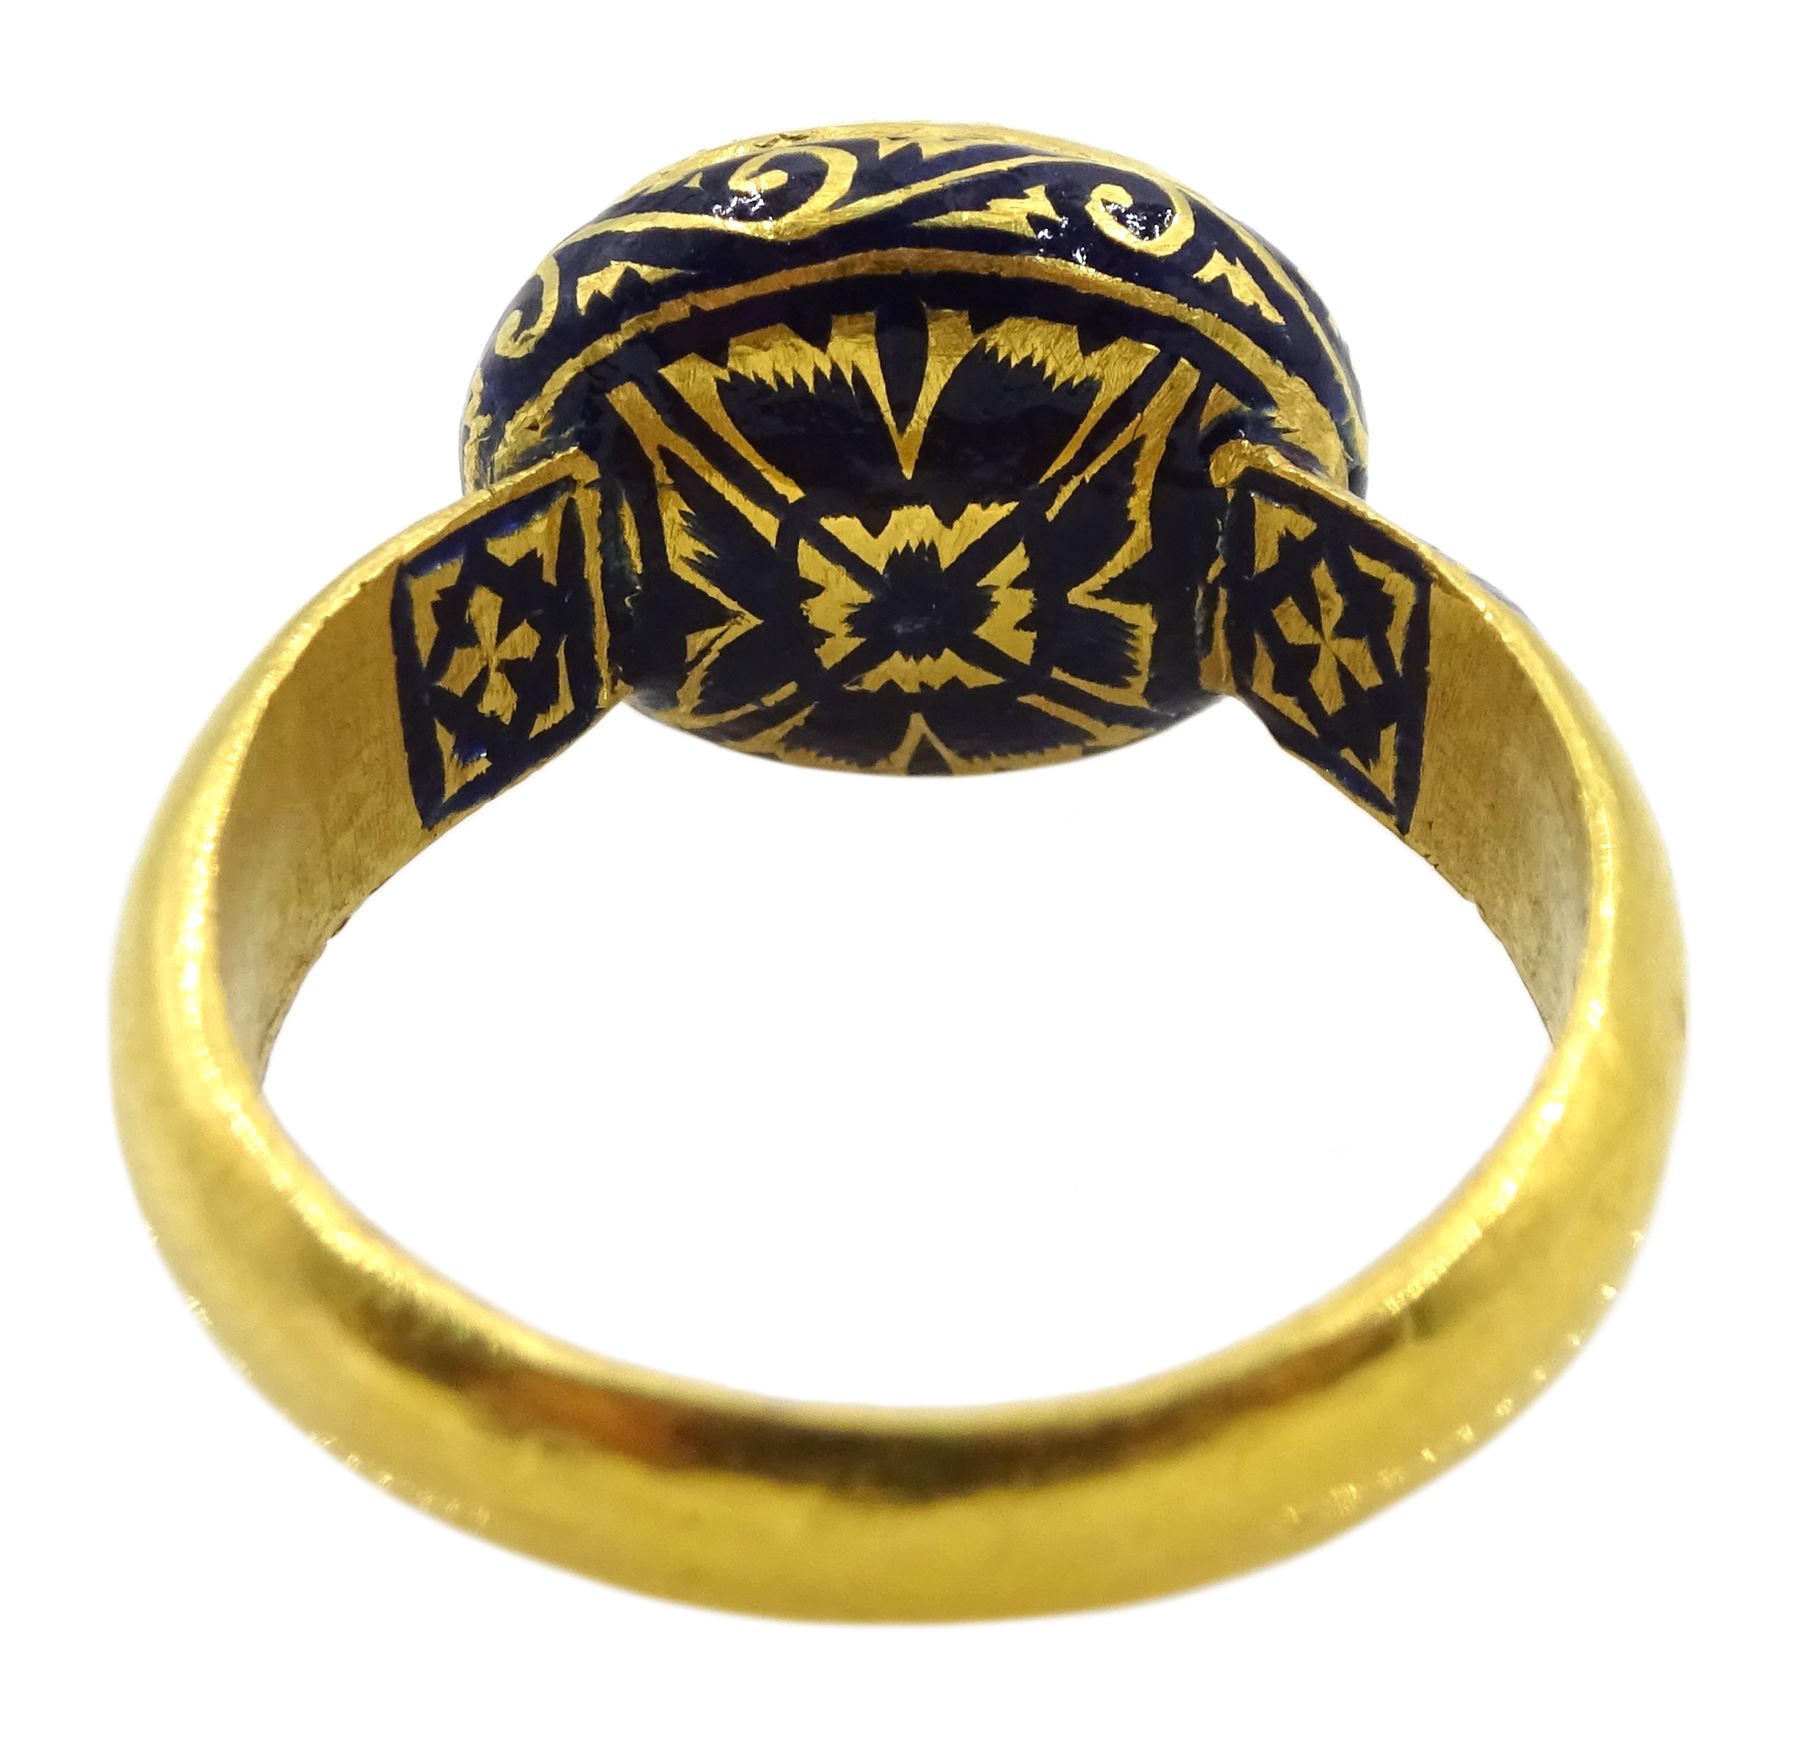 Late 19th/early 20th century gold Indian table cut diamond ring - Image 4 of 6